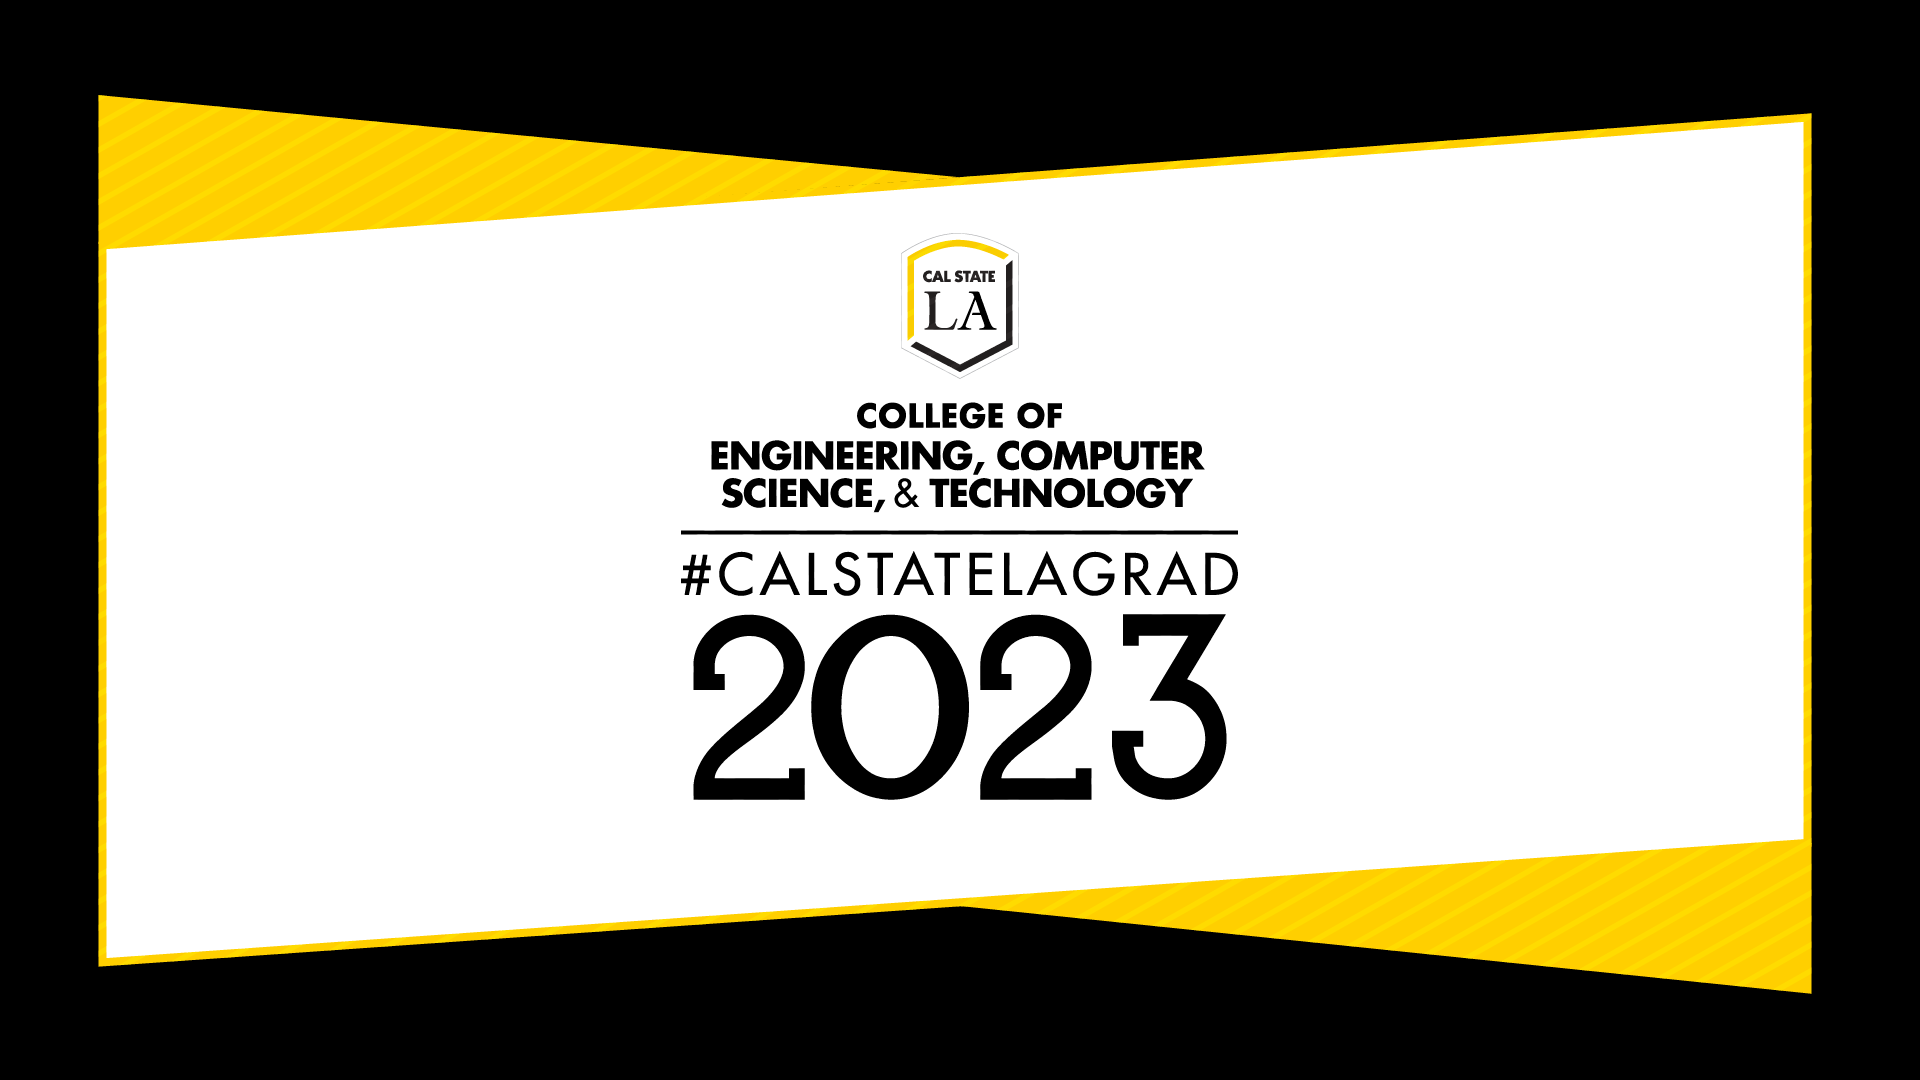 #CALSTATELAGRAD 2023 College of Engineering, Computer Science, and Technology social media graphic (black)